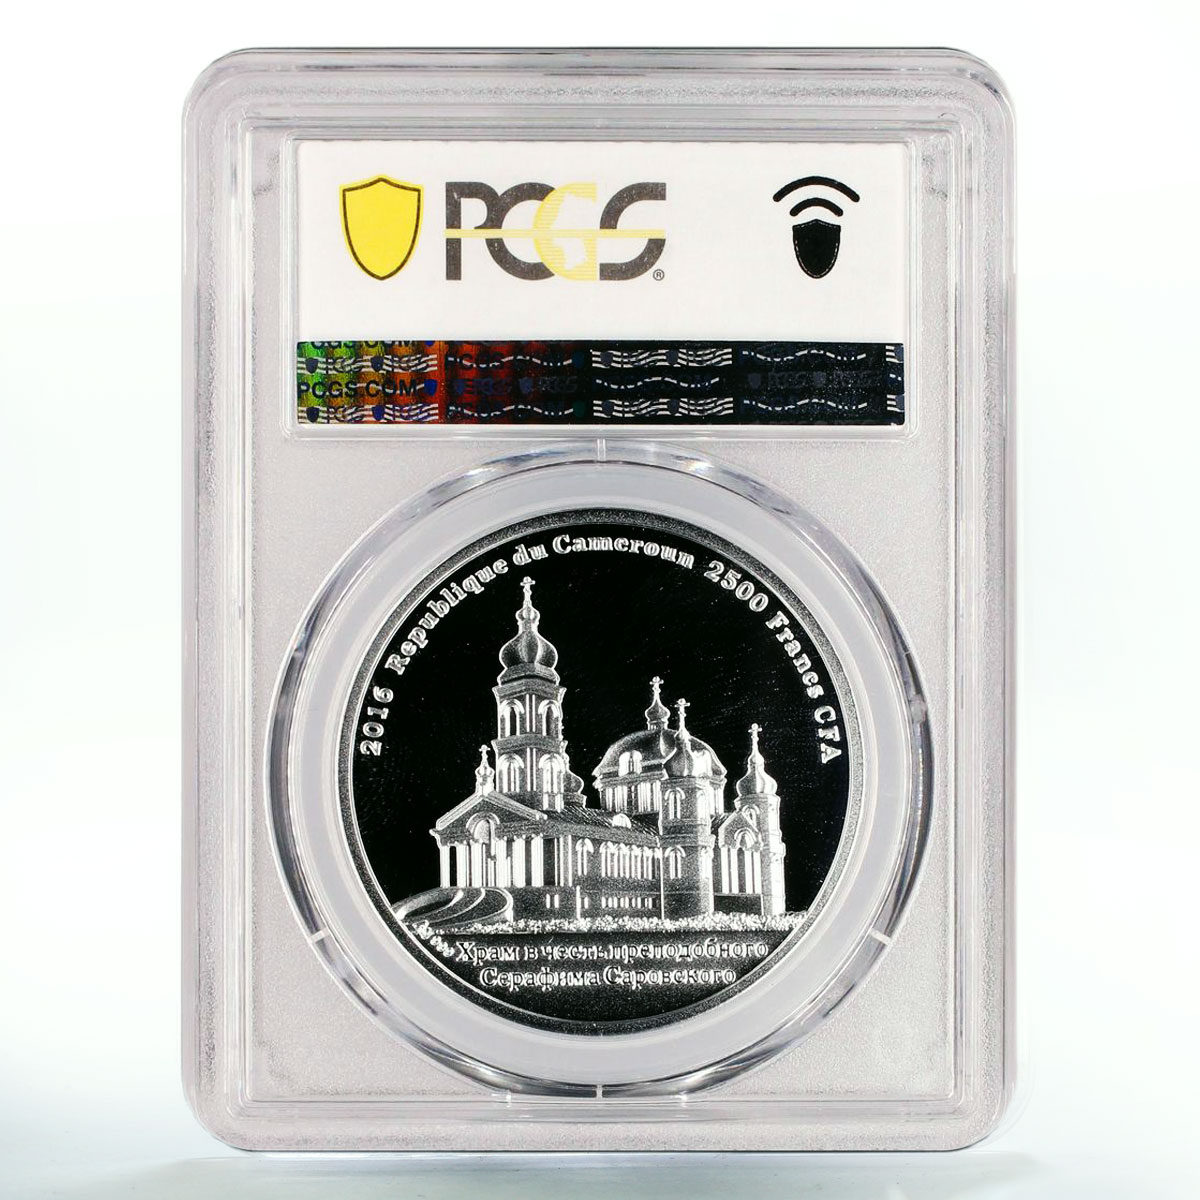 Cameroon 2500 francs Matrona Moscow Church Architecture PR68 PCGS Ag coin 2016